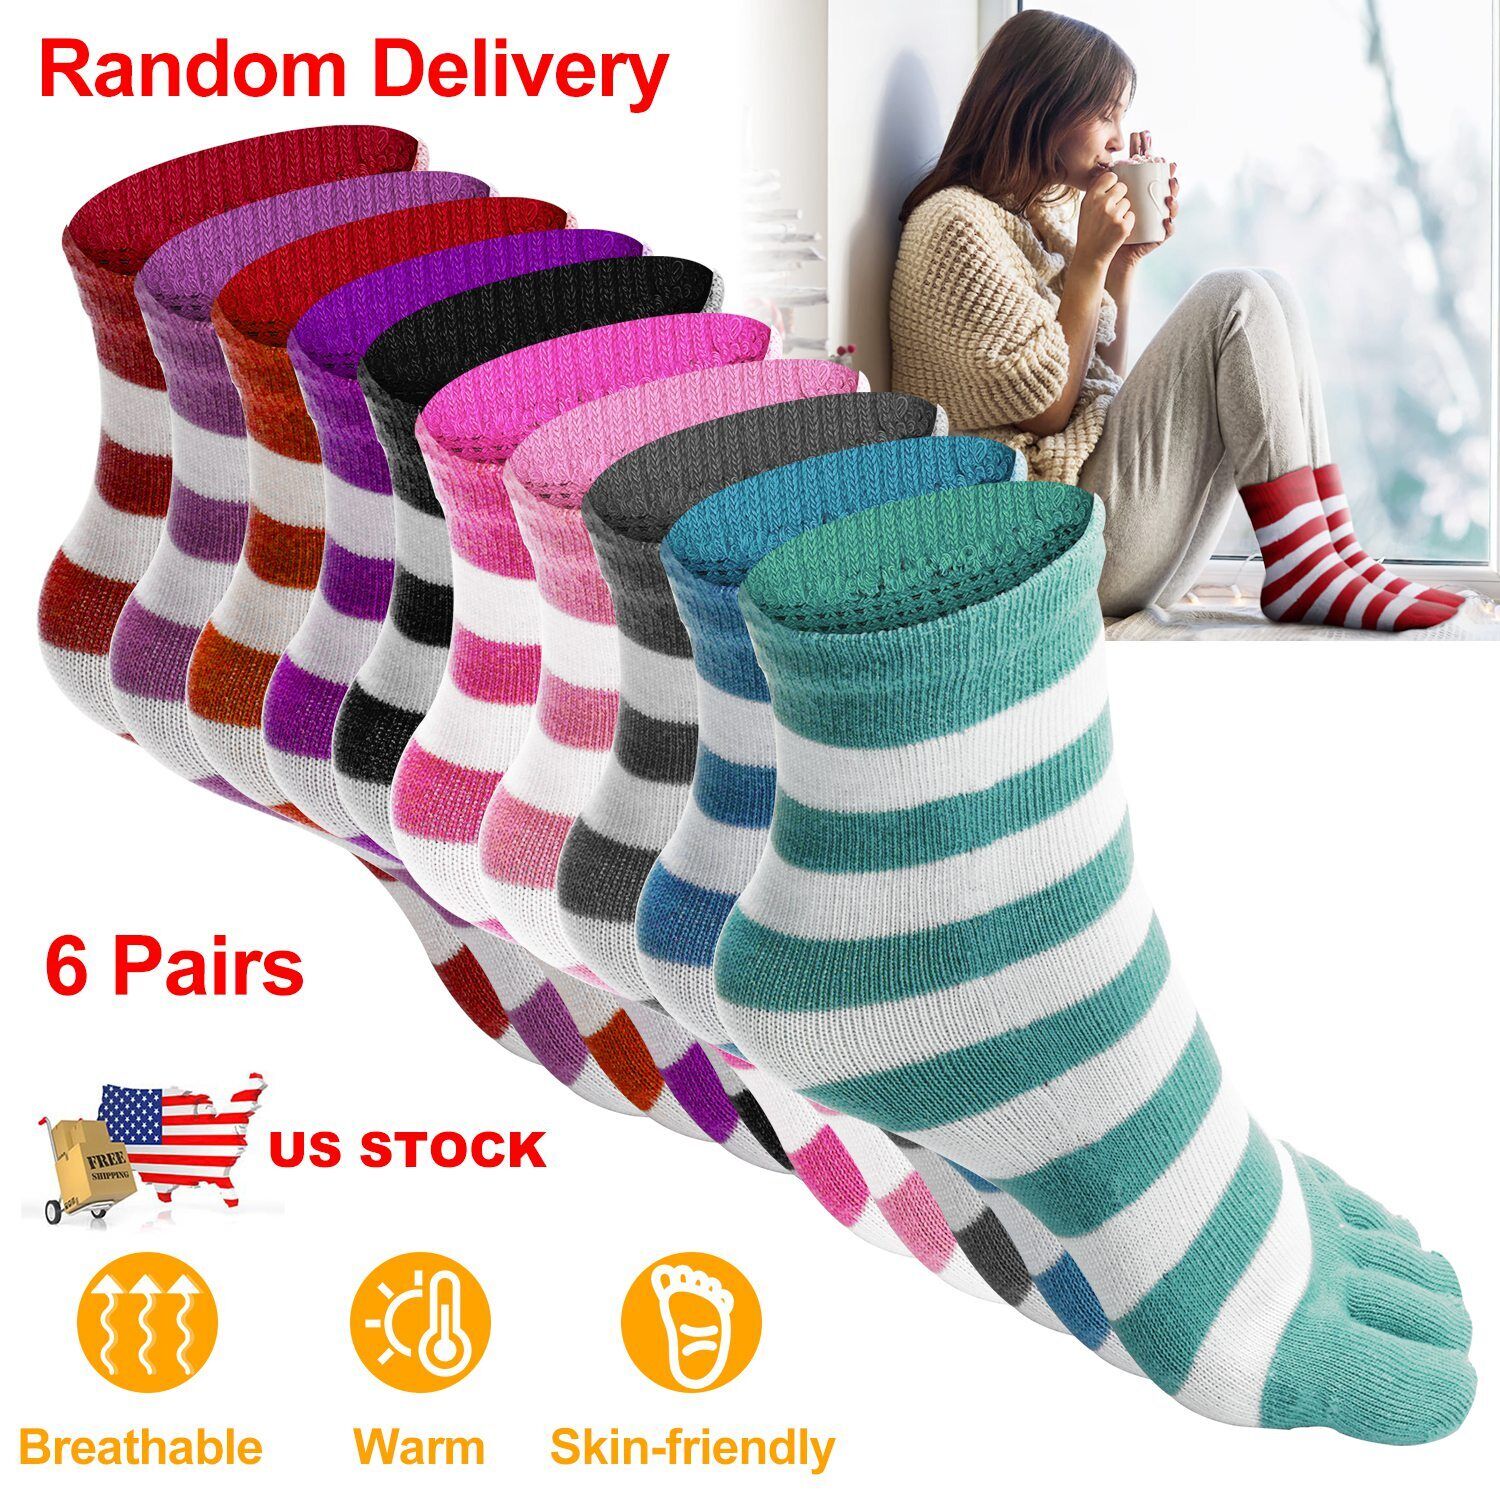 6 Pairs 5-Toes Warm Toe Socks Soft Breathable Ankle Athletic Fashion Socks Women N‘POLAR Does not apply